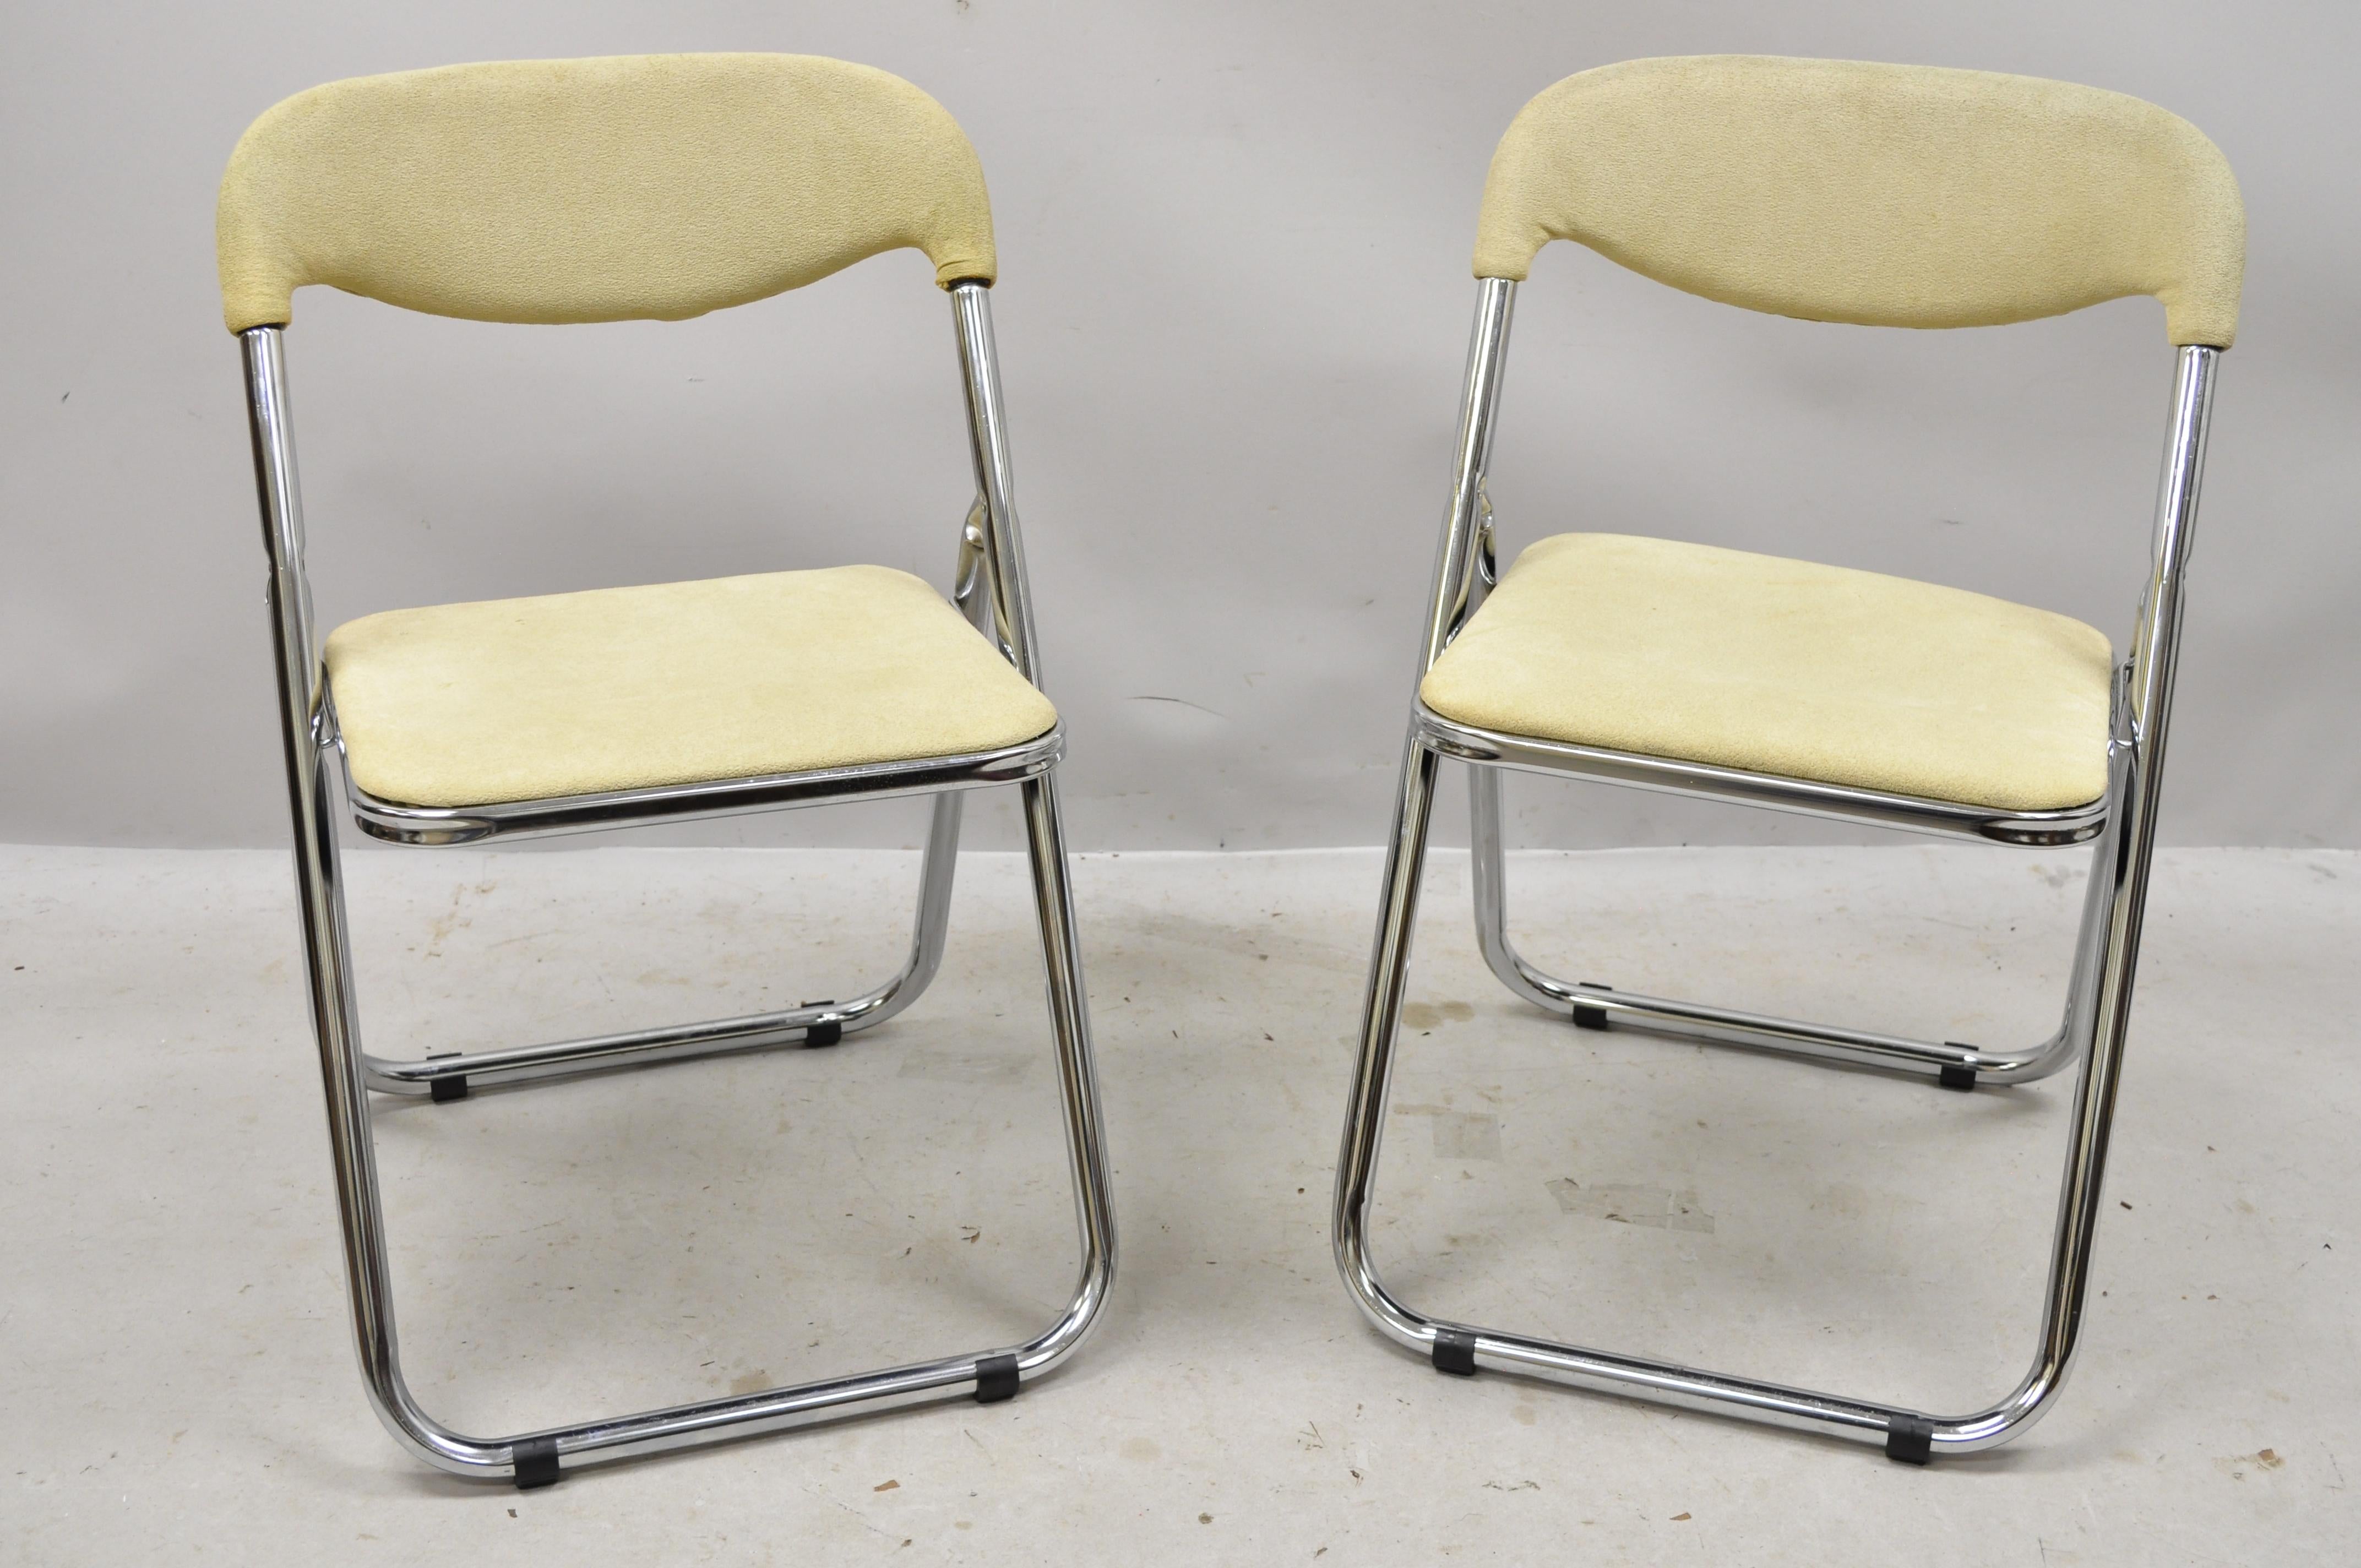 Vintage Italian Midcentury Chrome Upholstered Folding Game Chairs, Set of 4 For Sale 4